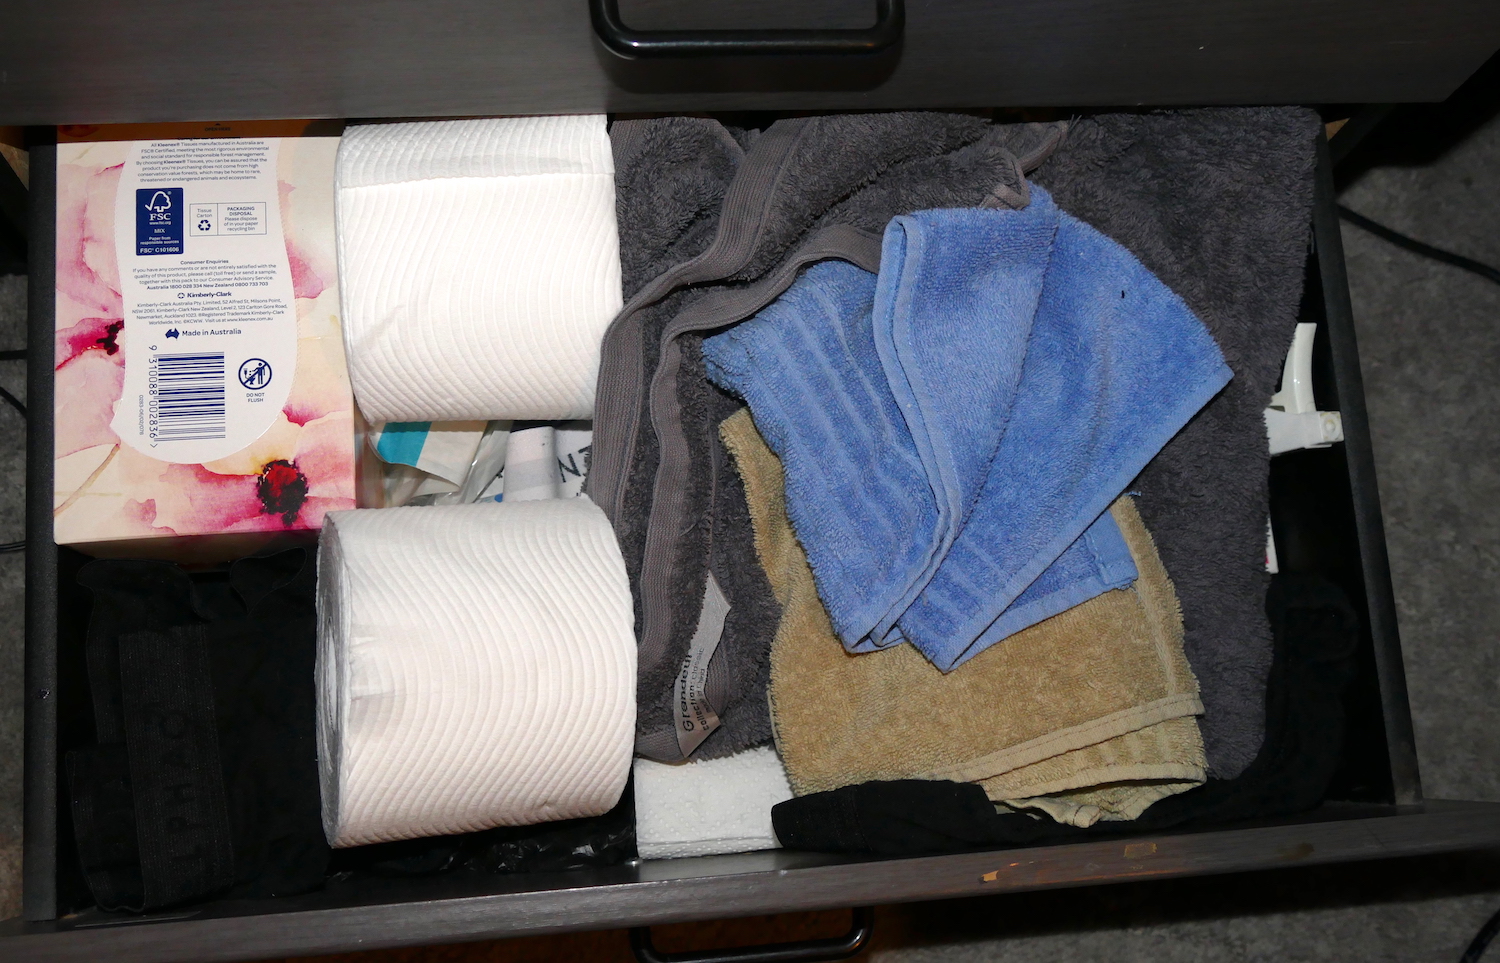 the bottom drawer contains many items to cope with bowel movements